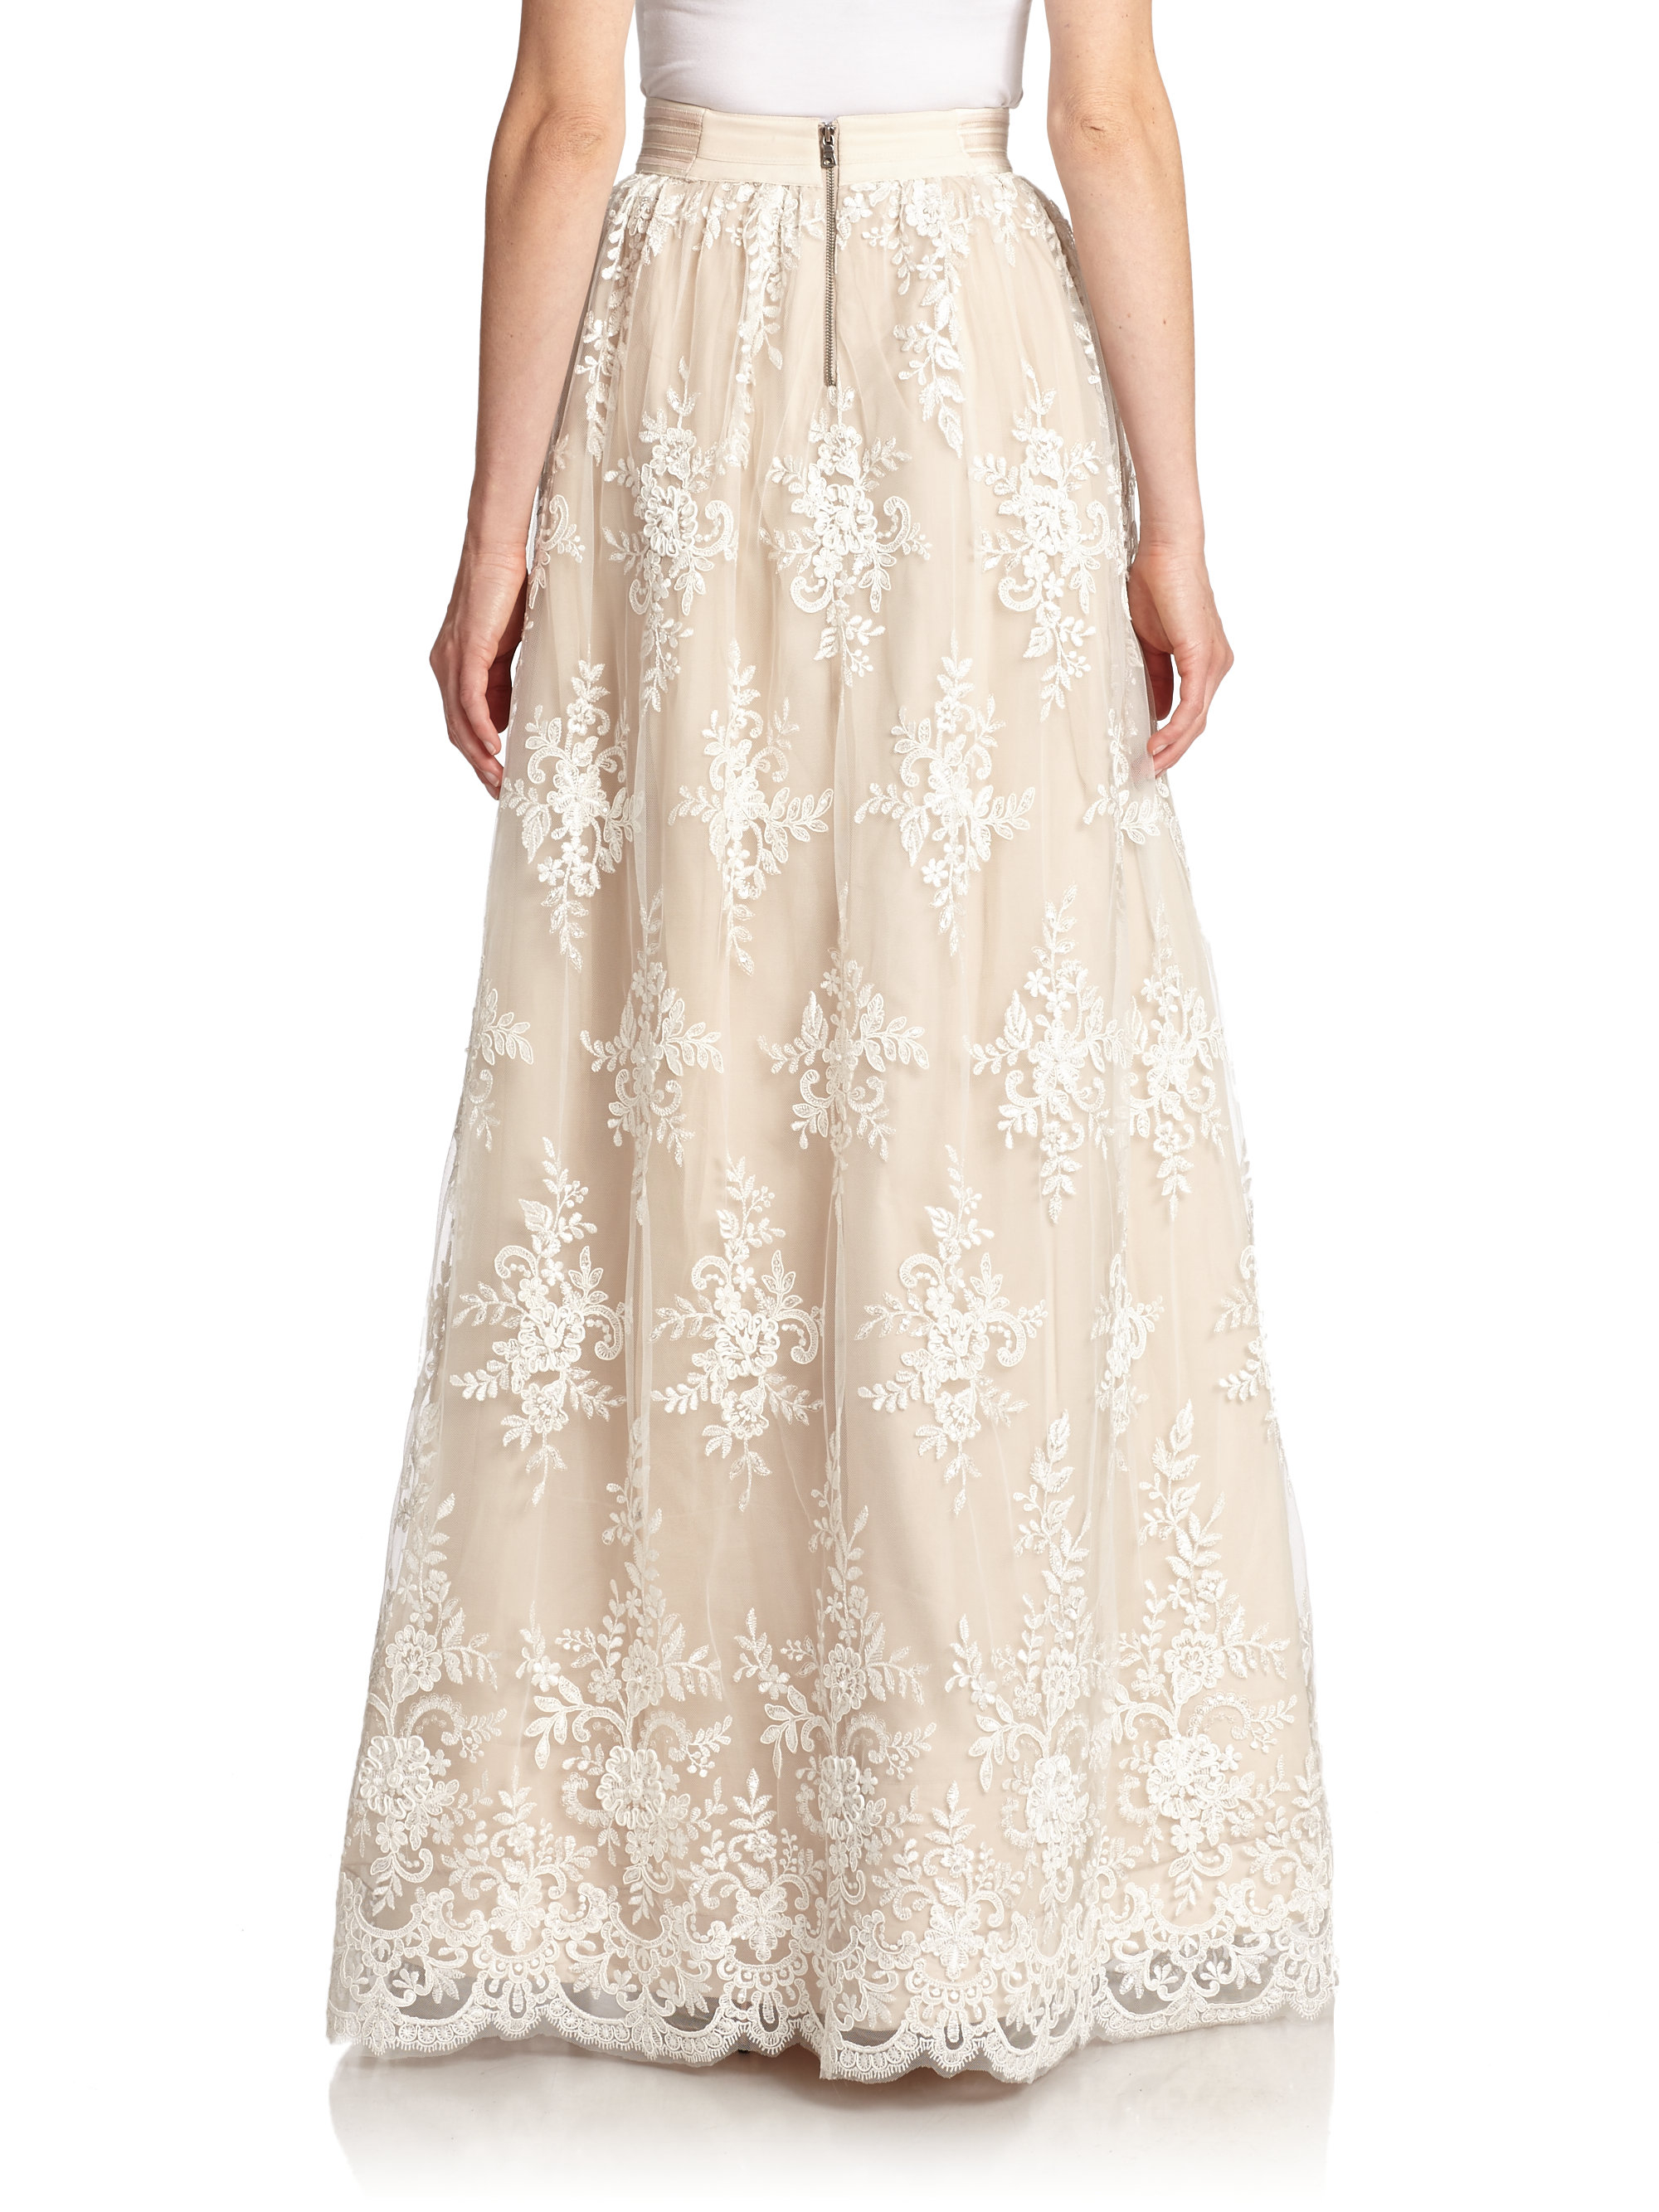 Alice + Olivia Carter Lace-overlay Maxi Skirt in White Nude (White) - Lyst